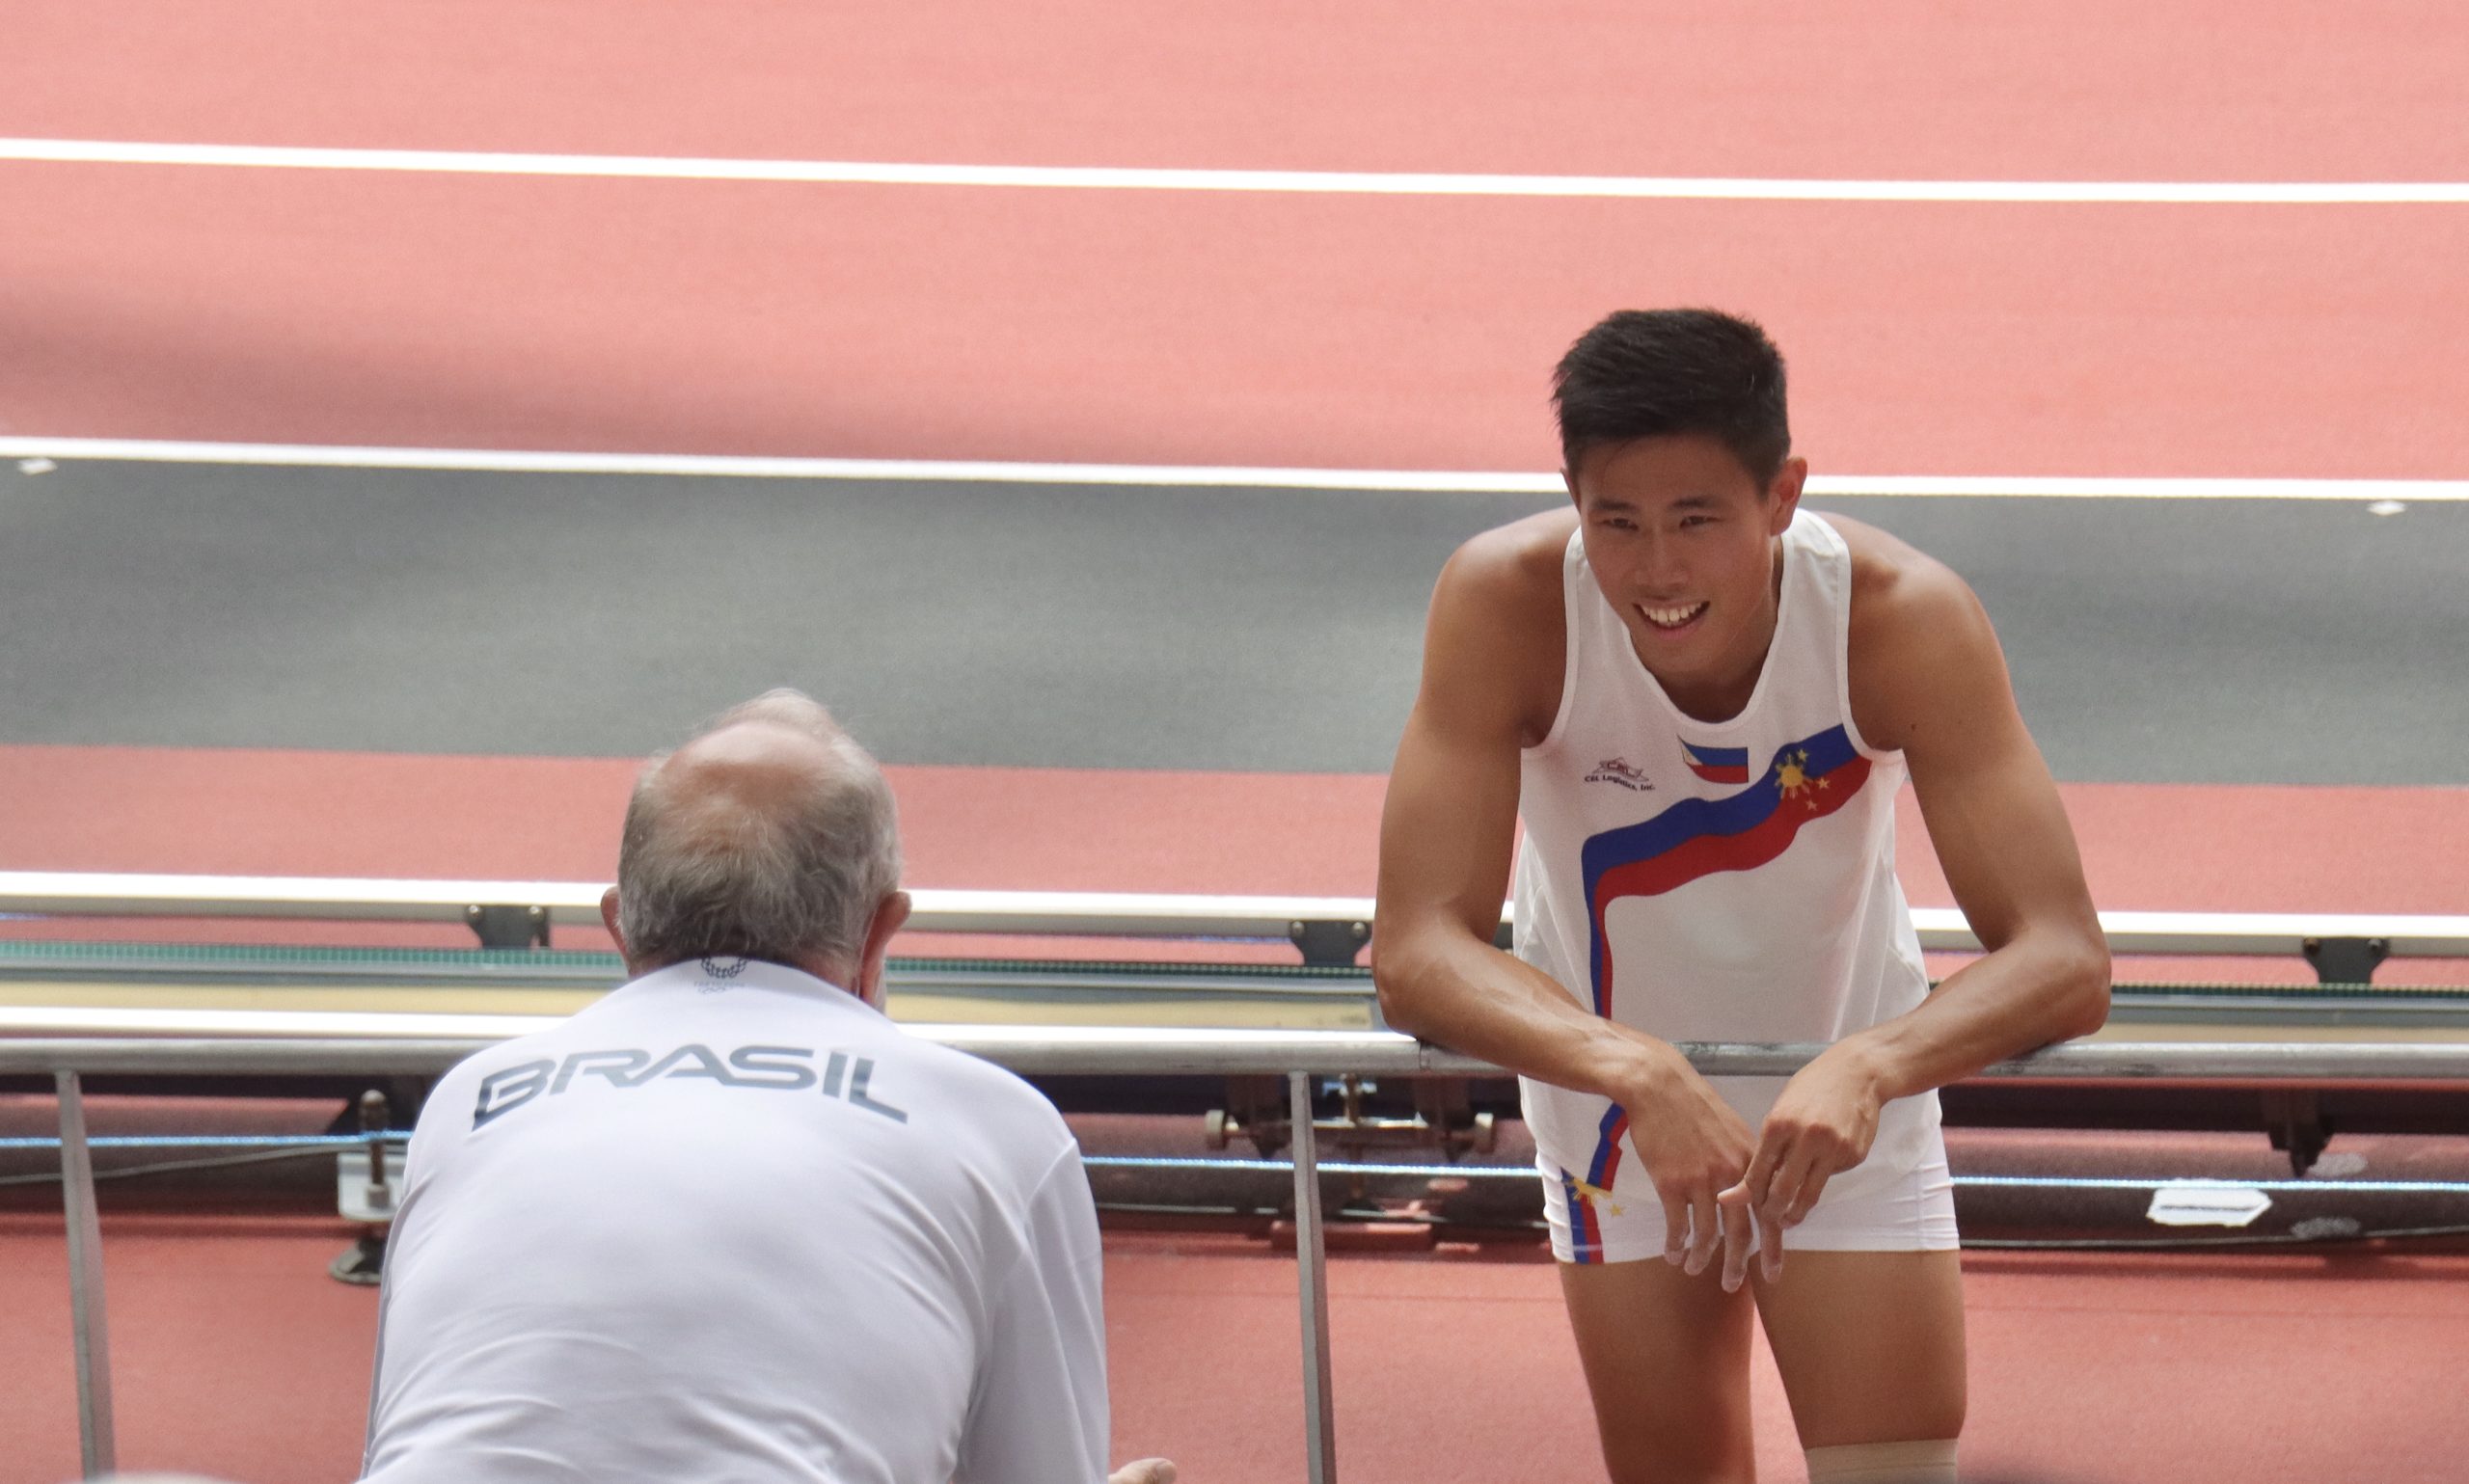 EJ Obiena (right) and Vitaly Petrov discuss strategy during a break in competition in the qualifying round of the Tokyo Olympics pole vault competition.